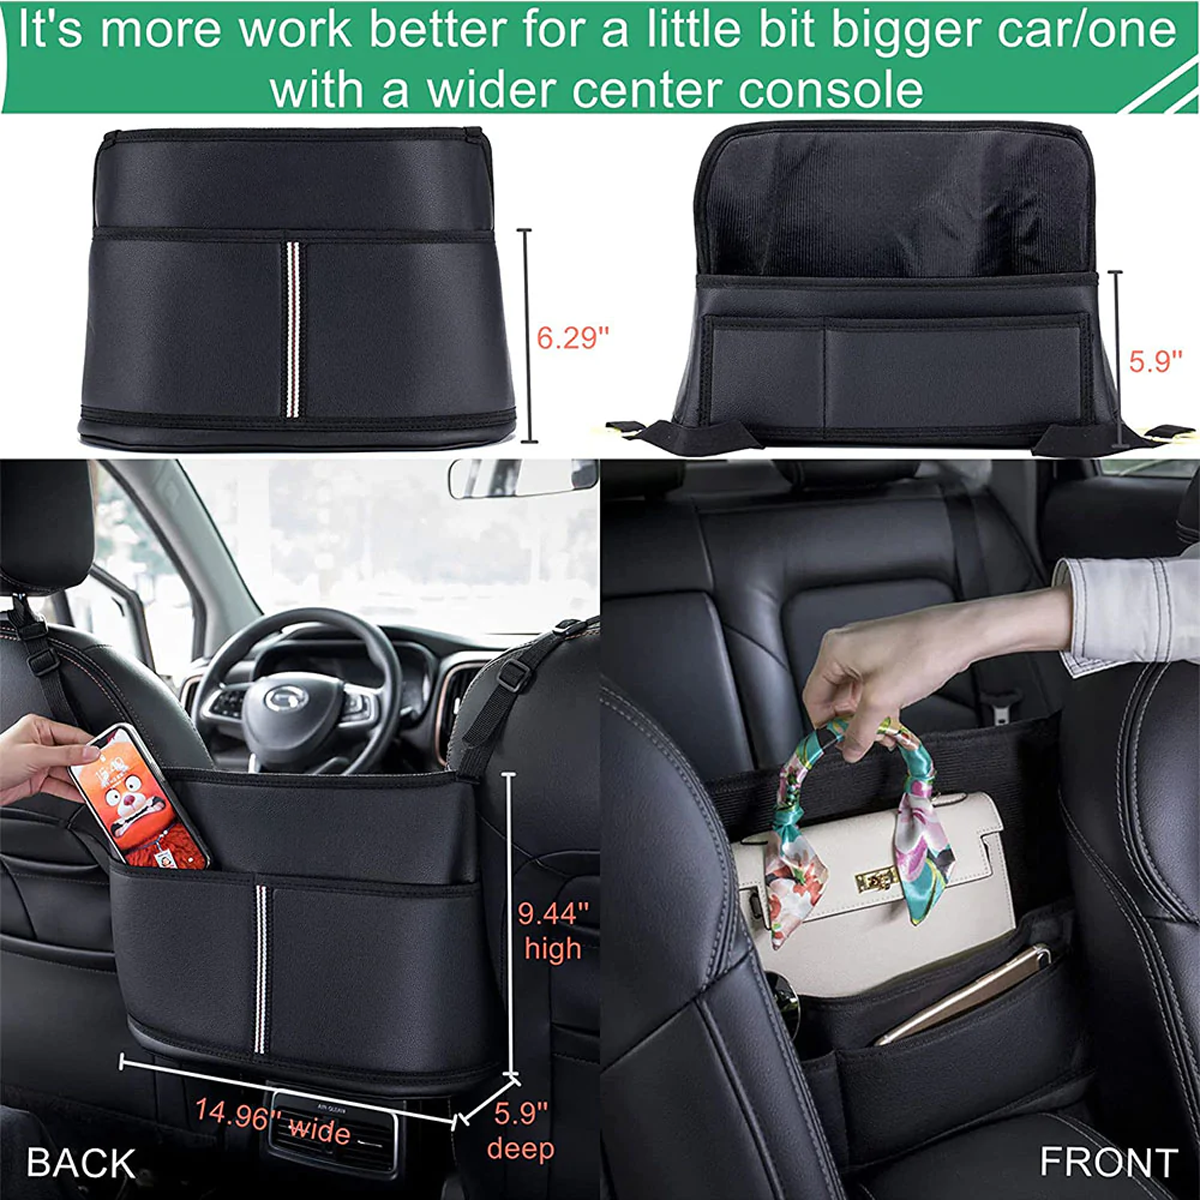 Custom Text For Car Purse Holder for Car Handbag Holder Between Seats Premium PU Leather, Compatible with All Cars, Auto Driver Or Passenger Accessories Organizer, Hanging Car Purse Storage Pocket Back Seat Pet Barrier MB11991